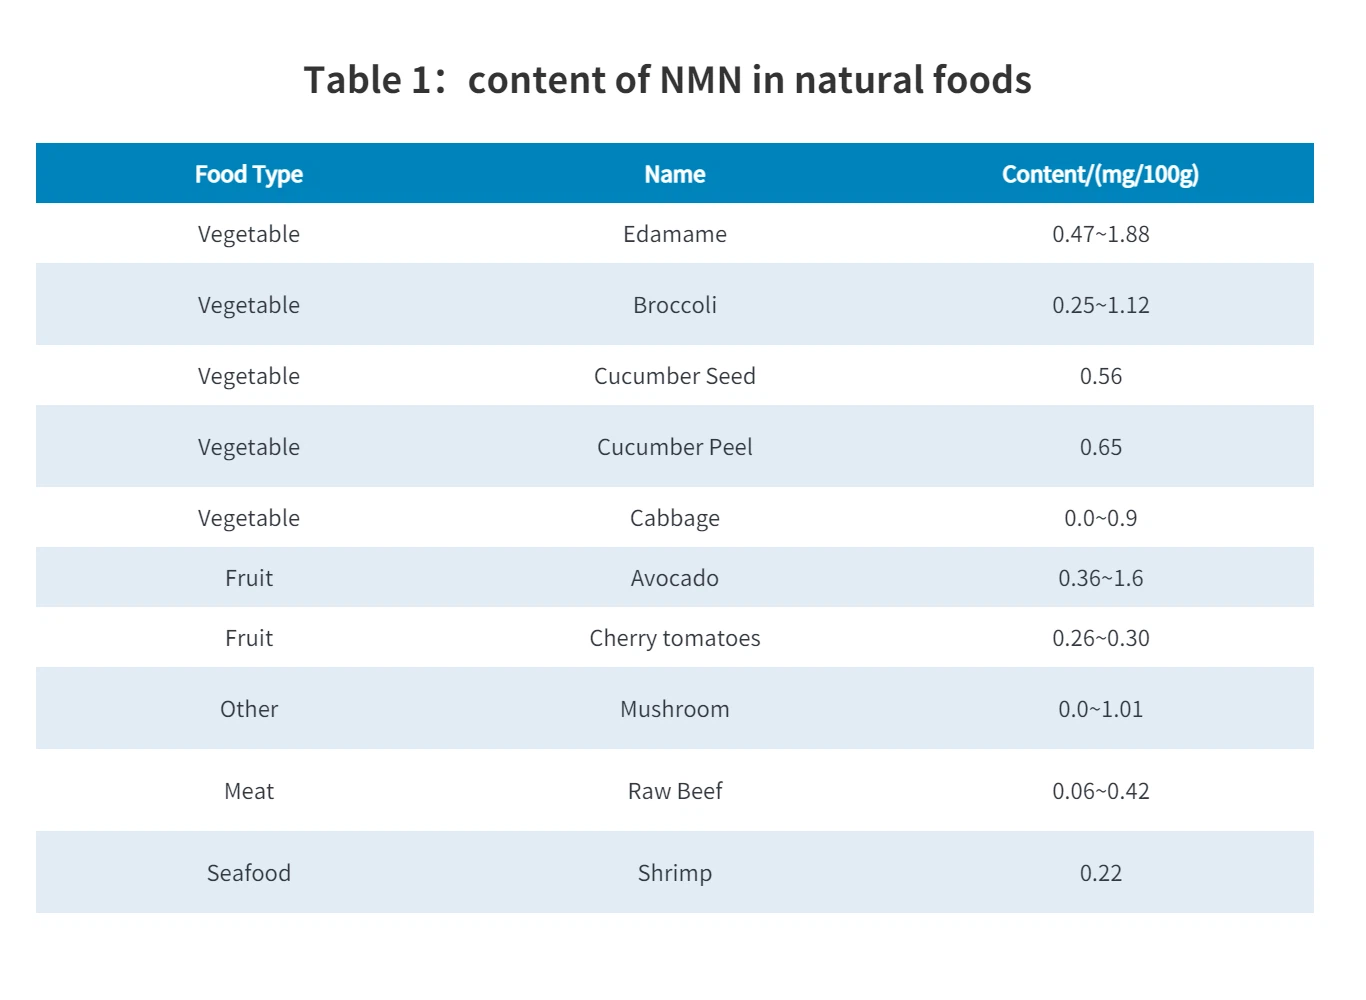 Table 1: content of NMN in naturalfoods